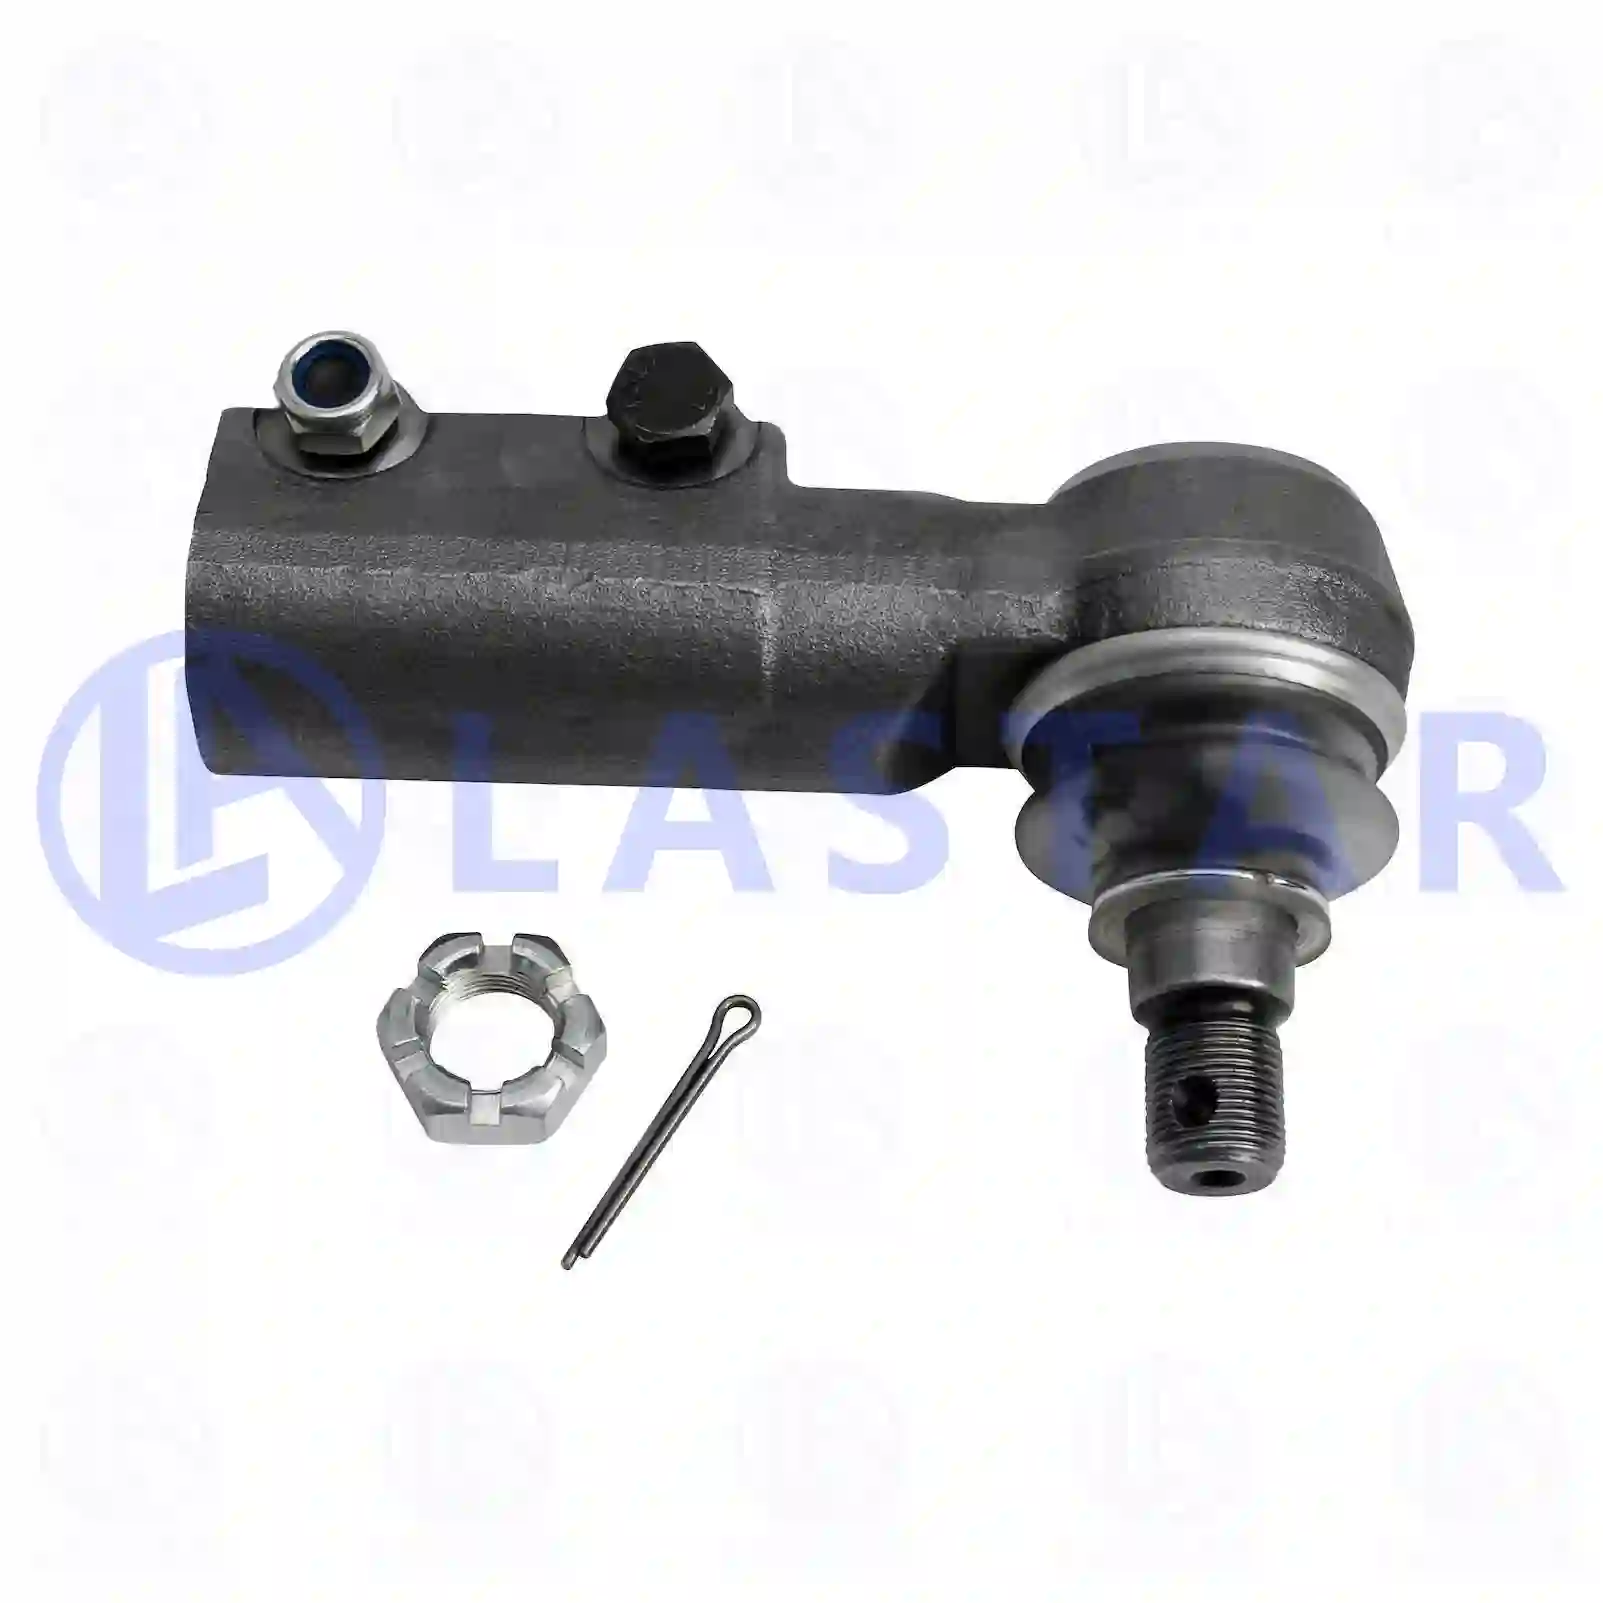 Drag Link Ball joint, right hand thread, la no: 77705366 ,  oem no:0003302835, 0003304035, 0003307735, 0003384929, 0013302135, 0013302635, 0013303235, 0013304035, 013302135 Lastar Spare Part | Truck Spare Parts, Auotomotive Spare Parts